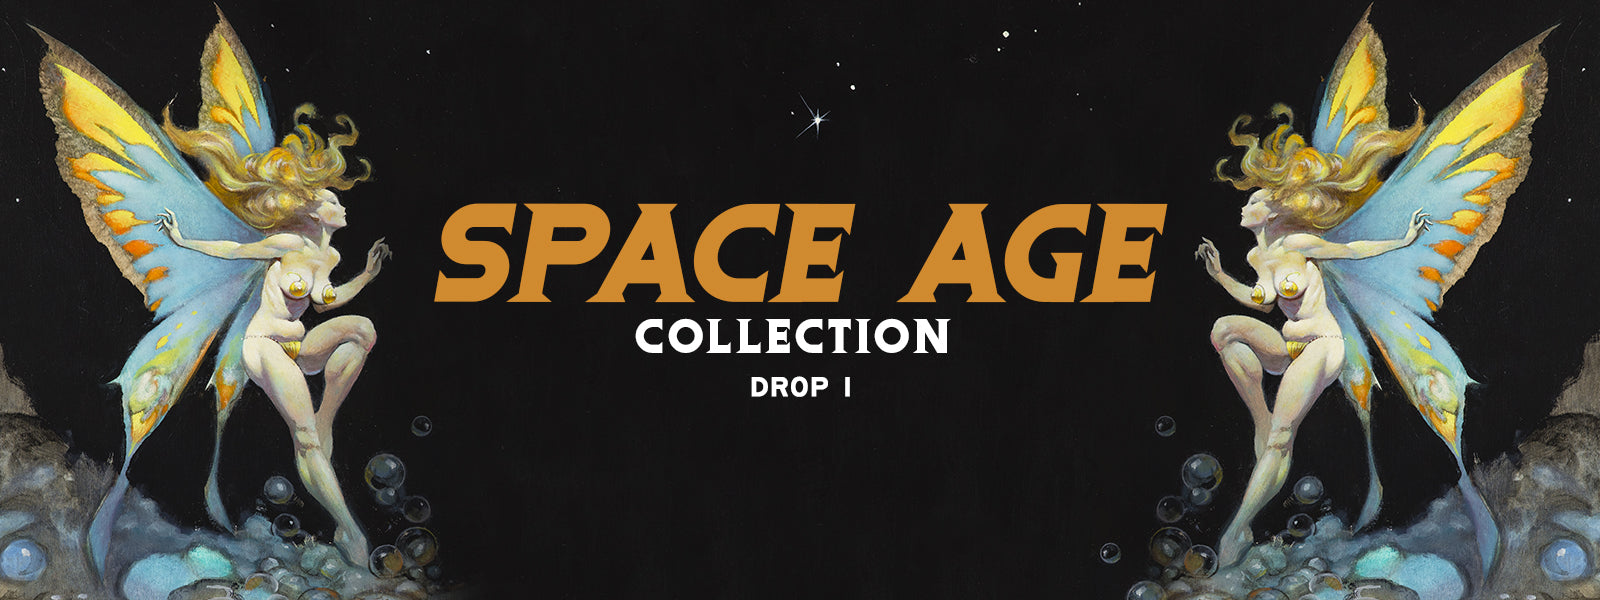 Space Age Collection